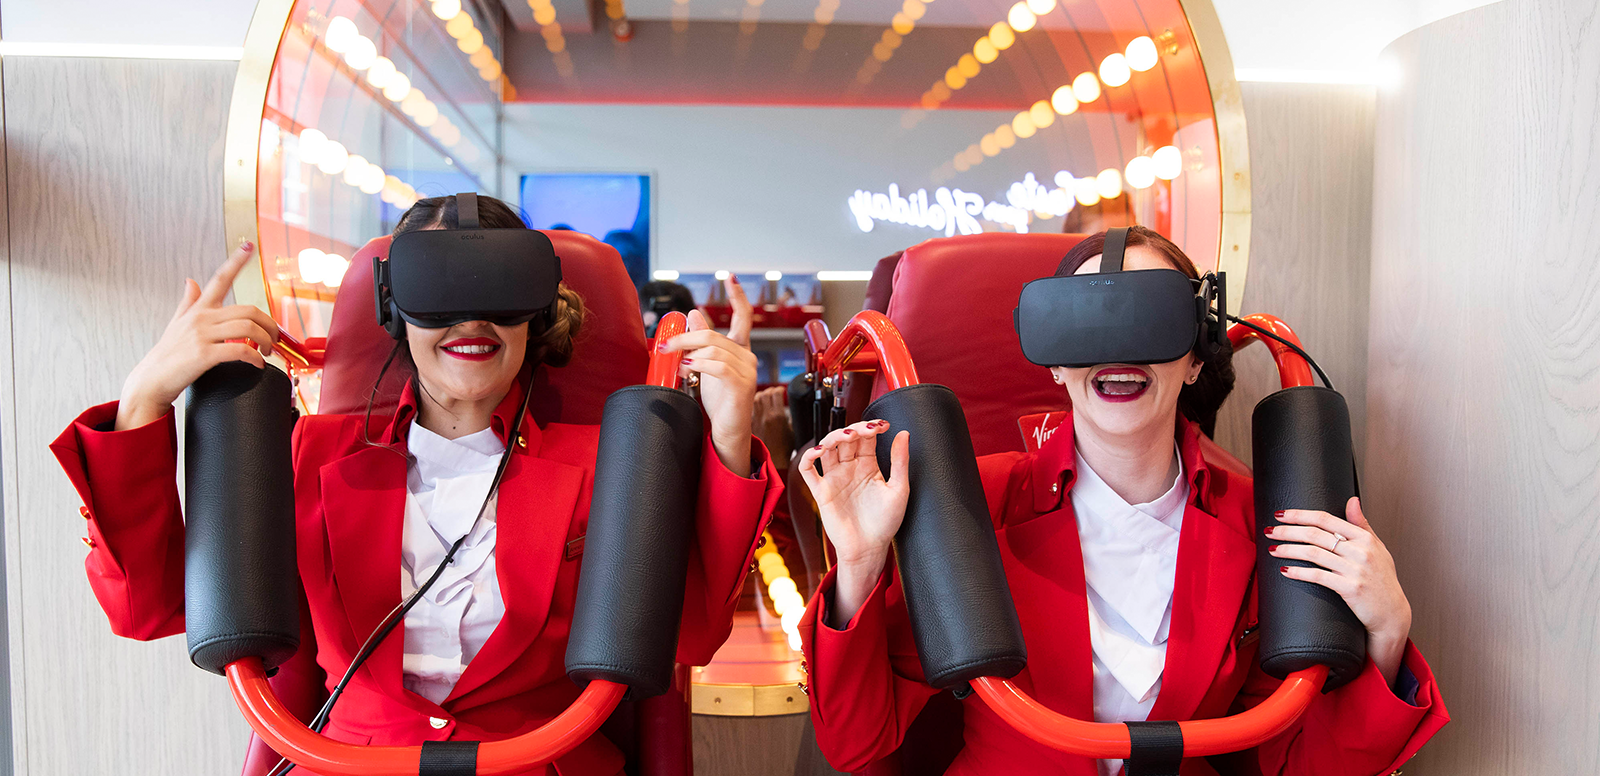 håndflade Necklet Officer Virgin Holidays creates spa, VR rollercoaster and bar in new experience  store - IPM Bitesize